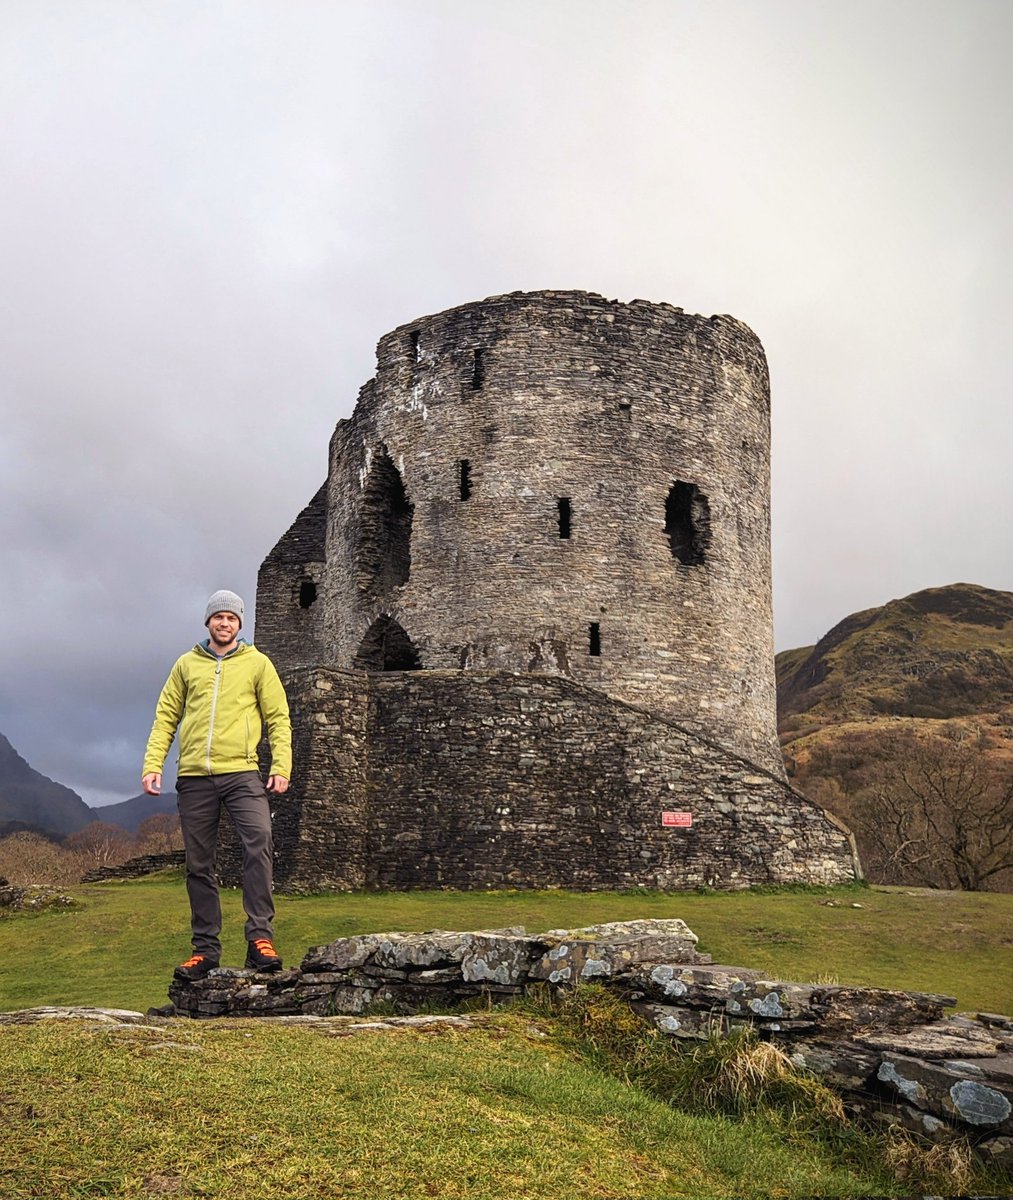 I love visiting Dolbadarn Castle. It's only small but it's in a cool spot overlooking the Llanberis Pass.